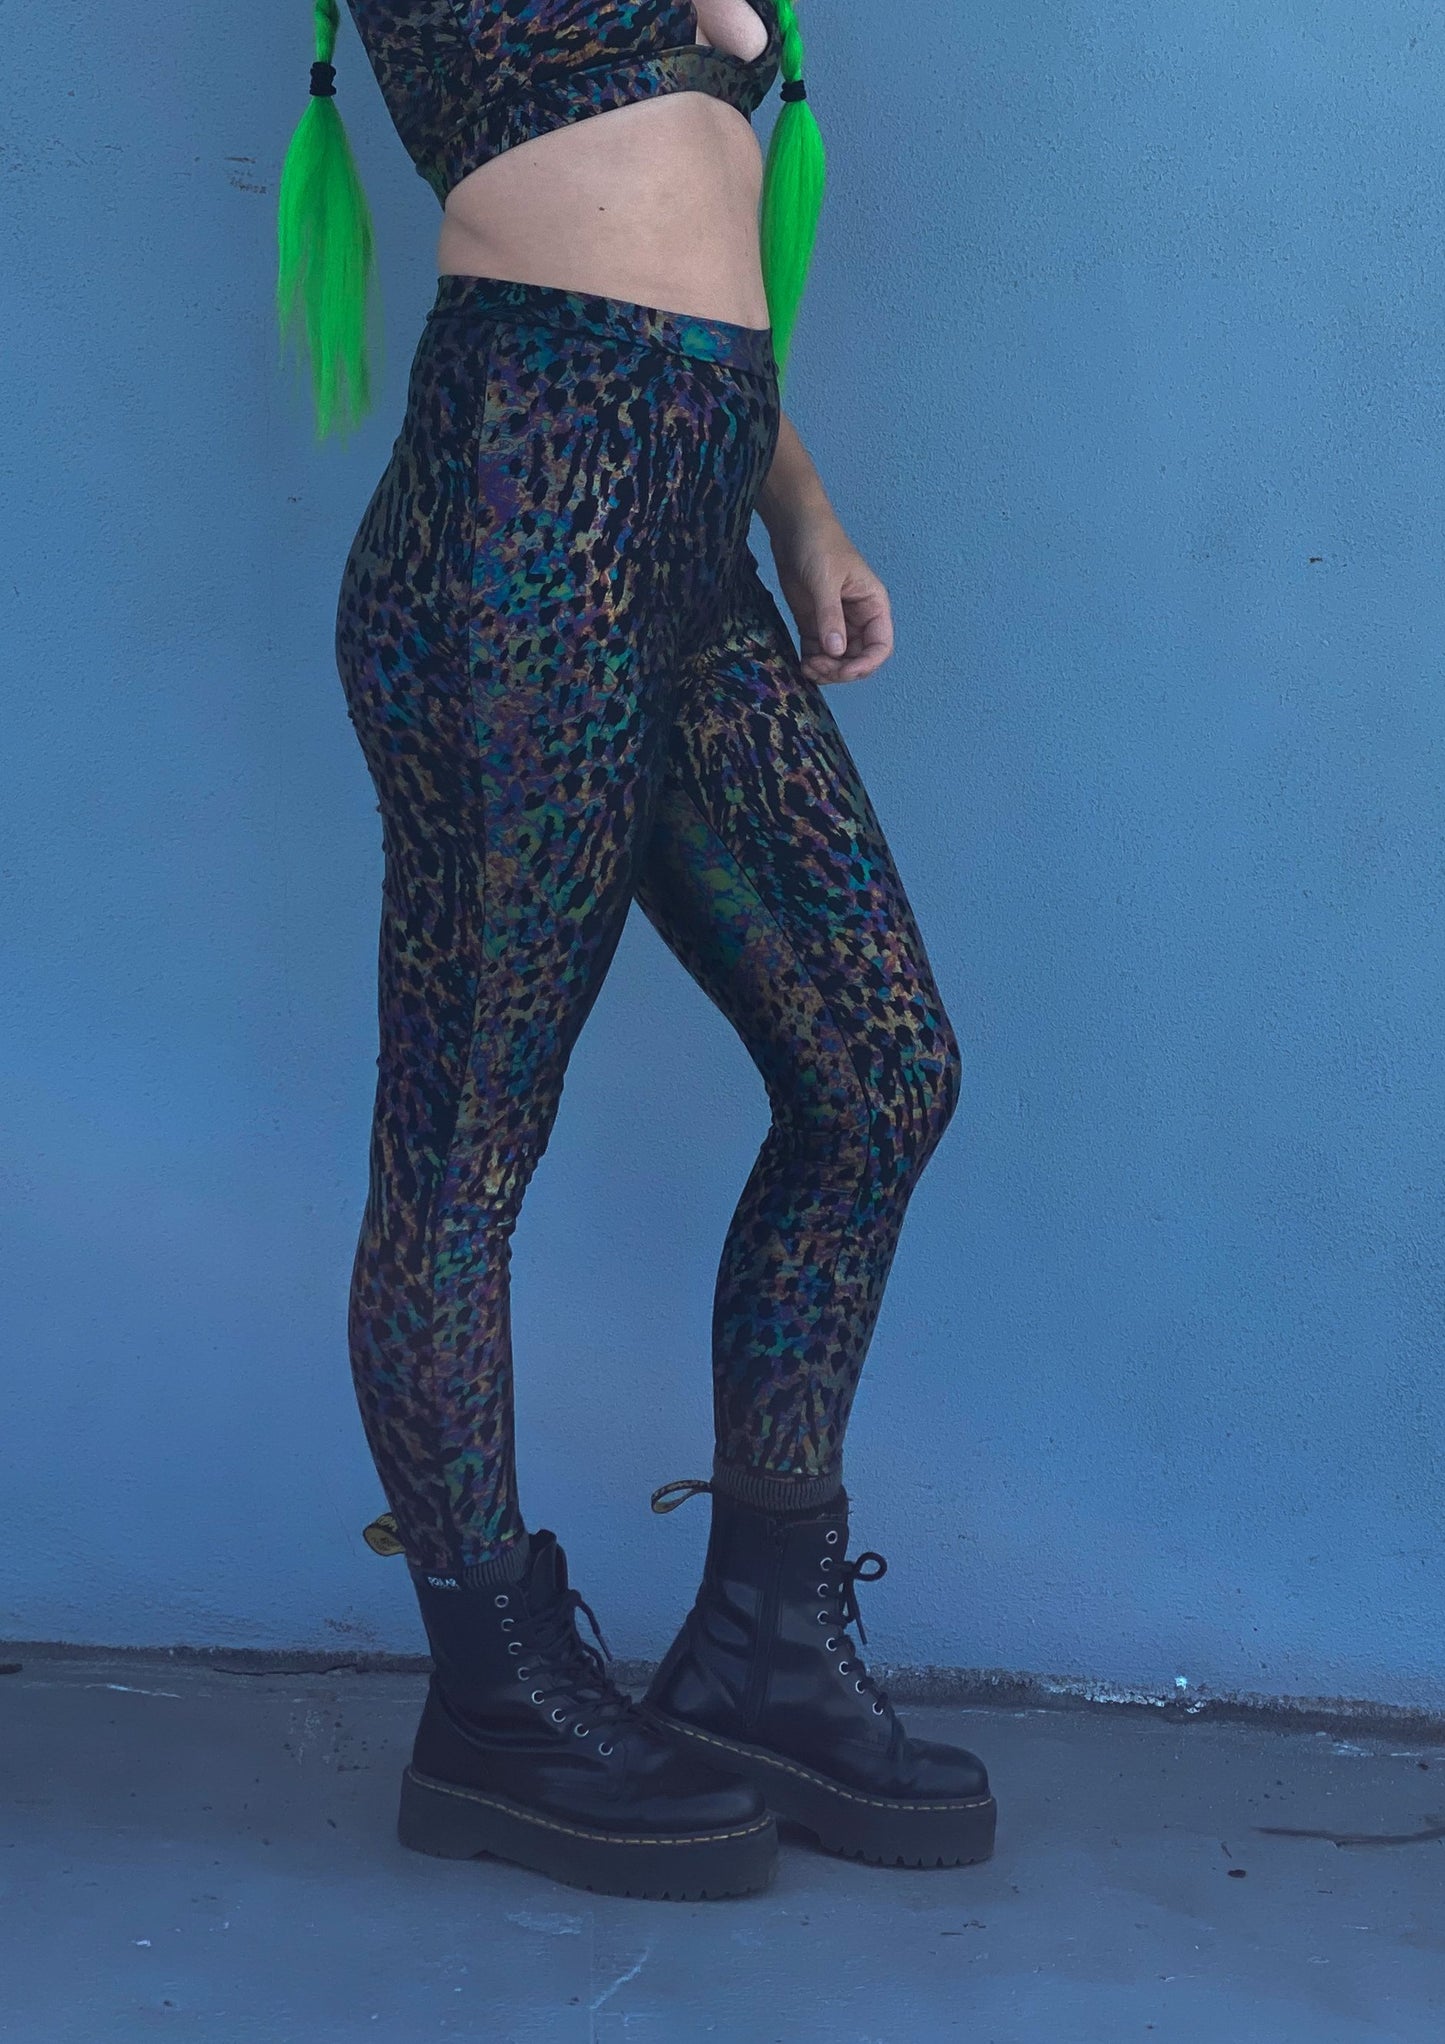 Naturally "Wasted" Leggings